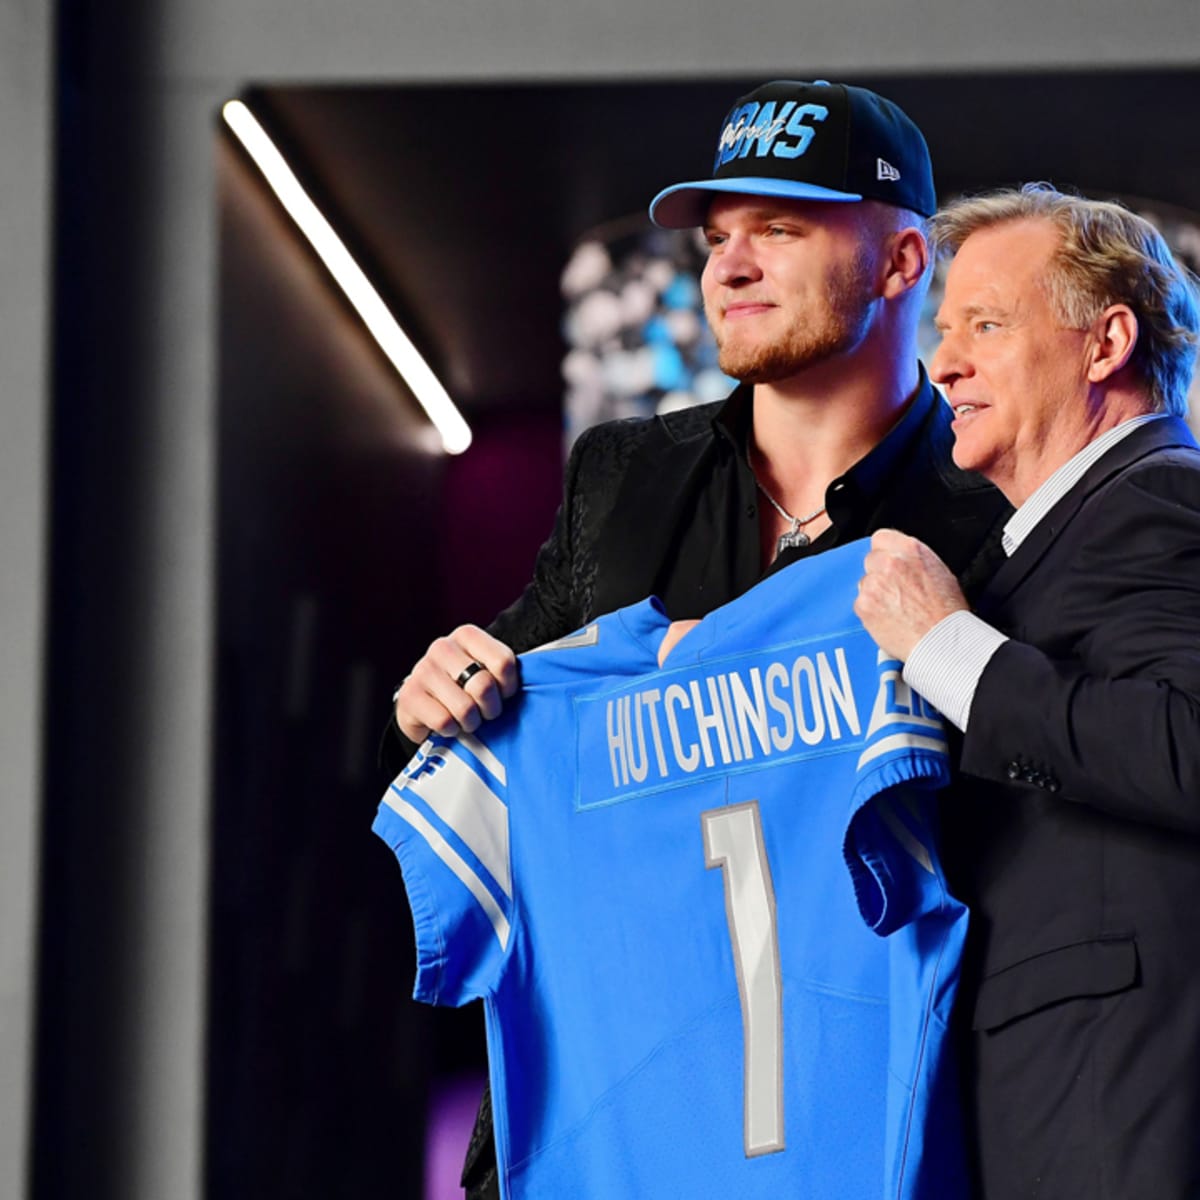 Detroit Lions explain why they picked their jersey number